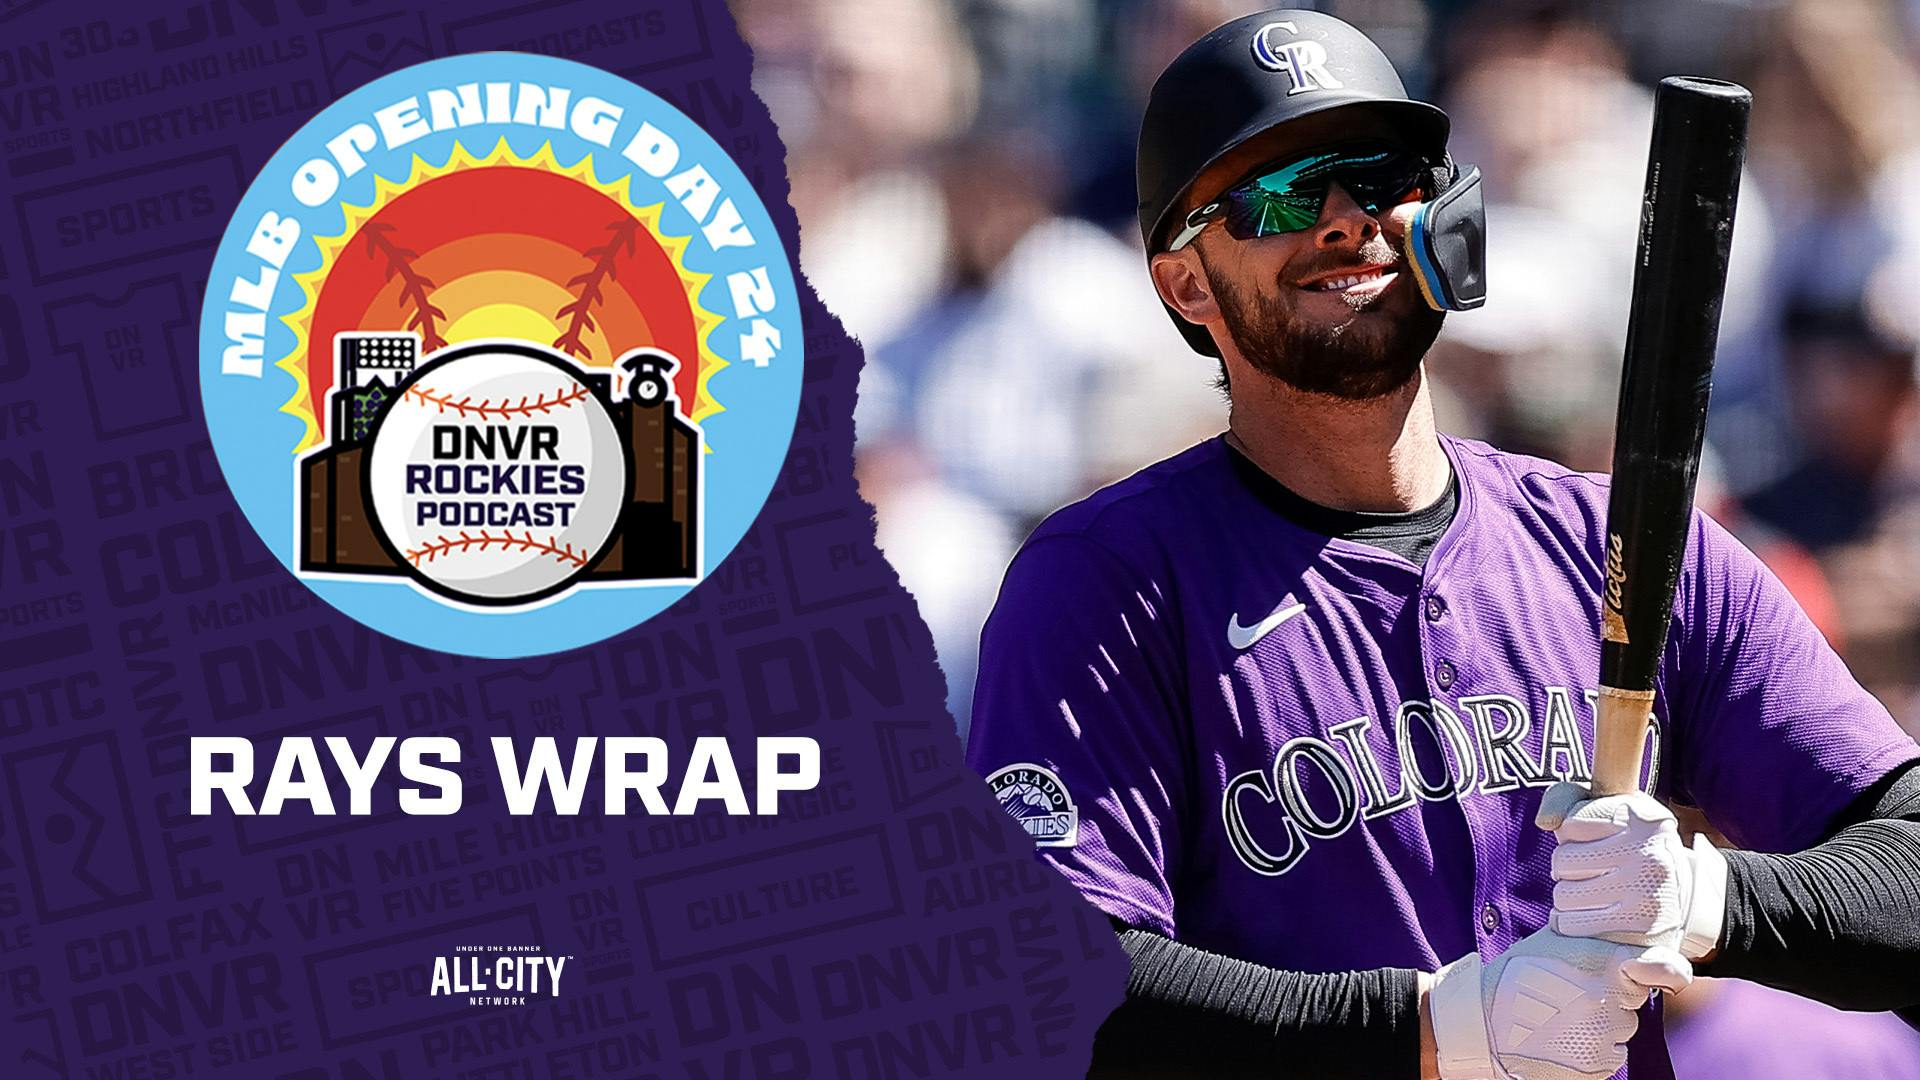 Series Wrap: Kris Bryant and Colorado Rockies come up short against Tampa Bay Rays| DNVR Rox Podcast